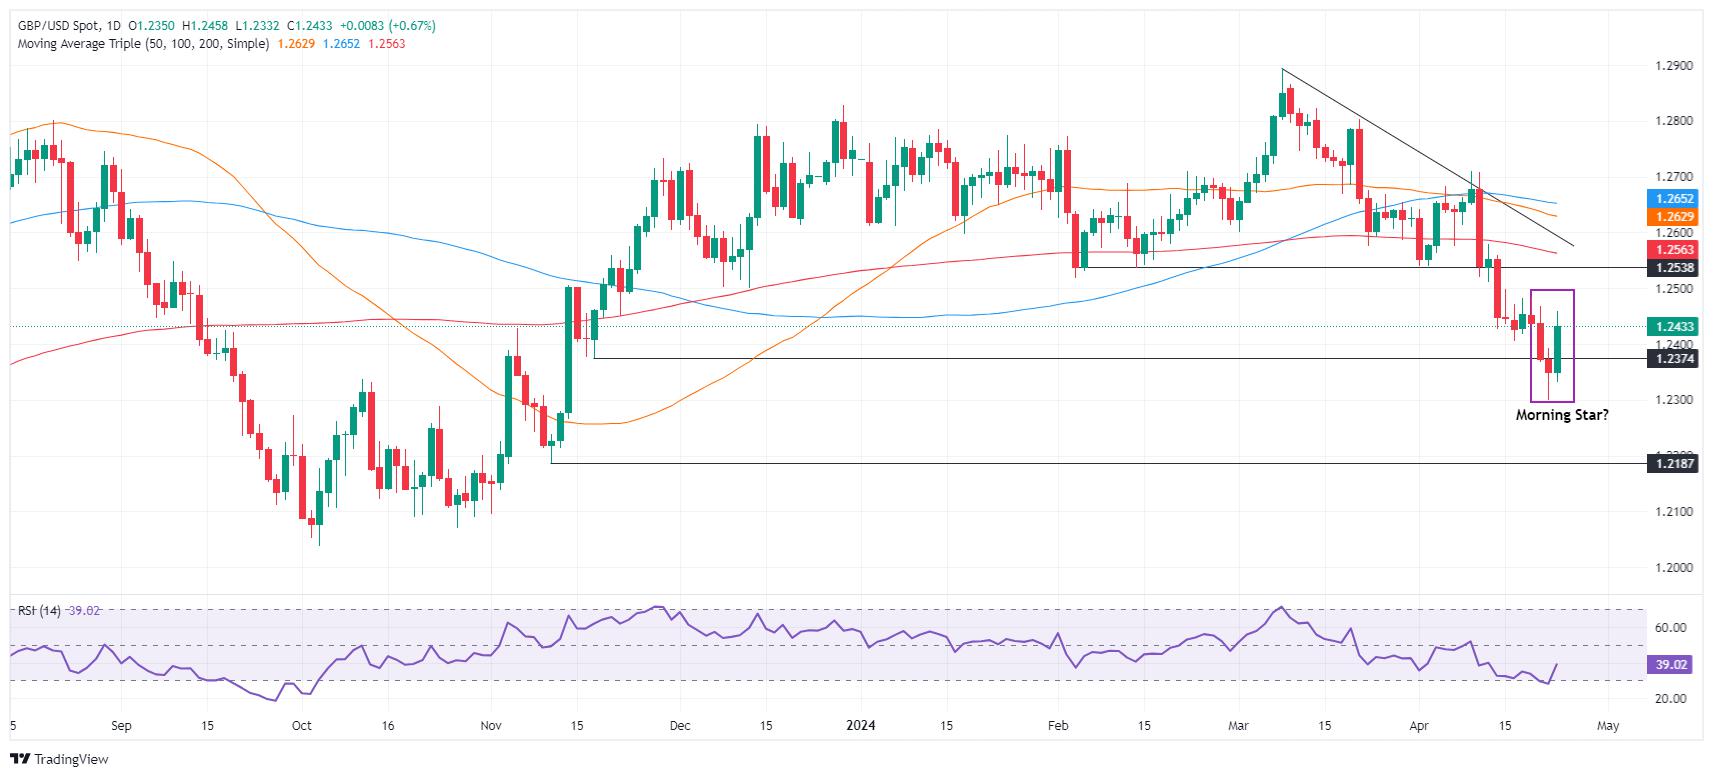 GBP/USD Price Analysis: Bulls stepped in as ‘morning star’ chart pattern looms